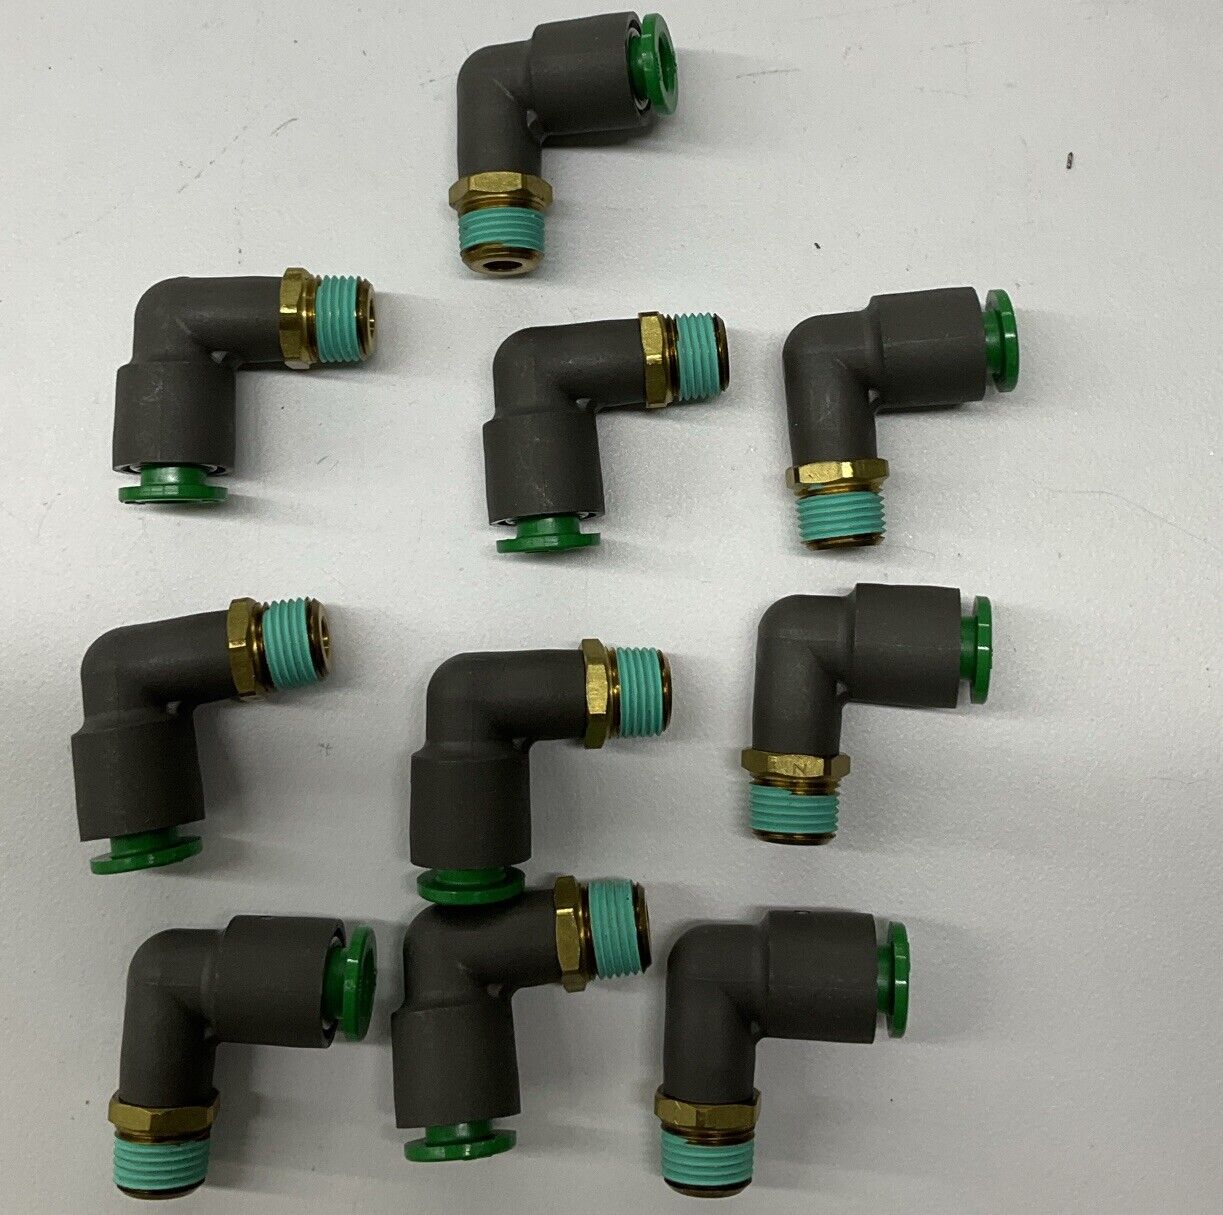 SMC KRL07-34S Bag of 10 90 Degree Push-to-connect Fittings (RE122) - 0